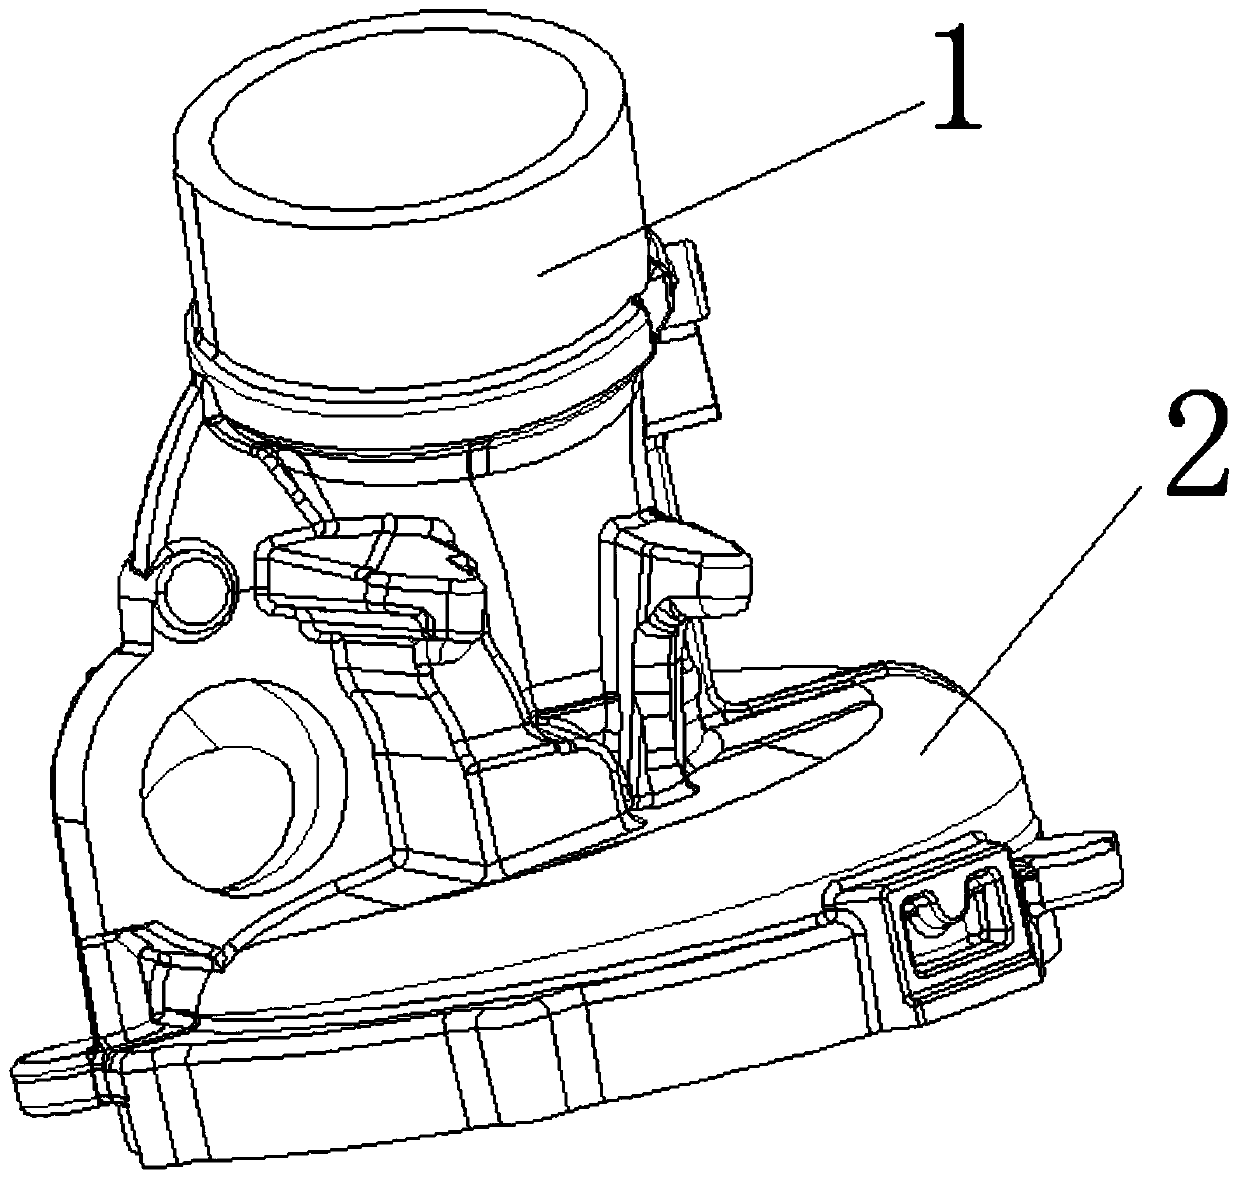 Mold core sand removal method for low-pressure cast turbocharger shell